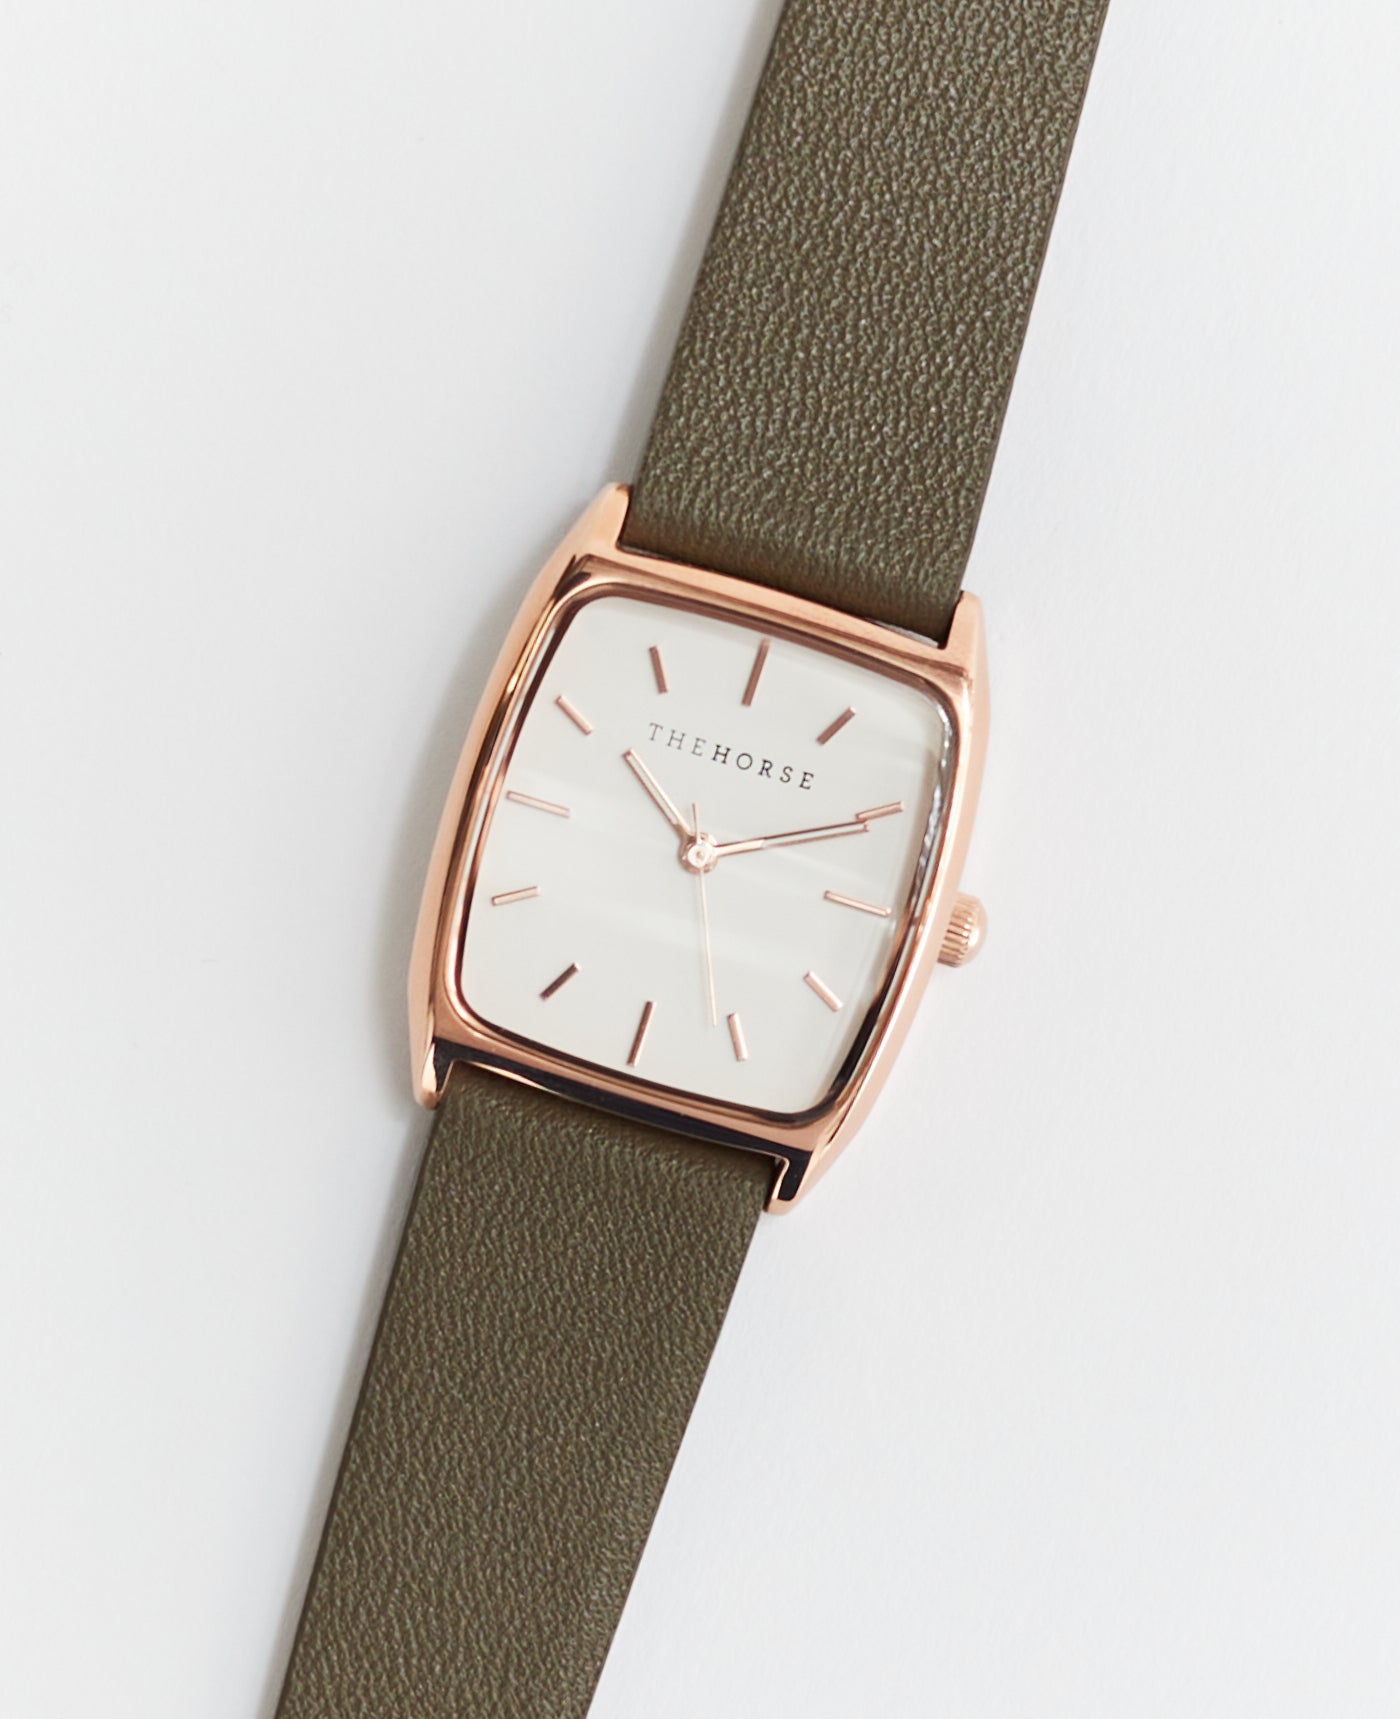 The Dress Watch: Rose Gold / White Dial / Olive Leather